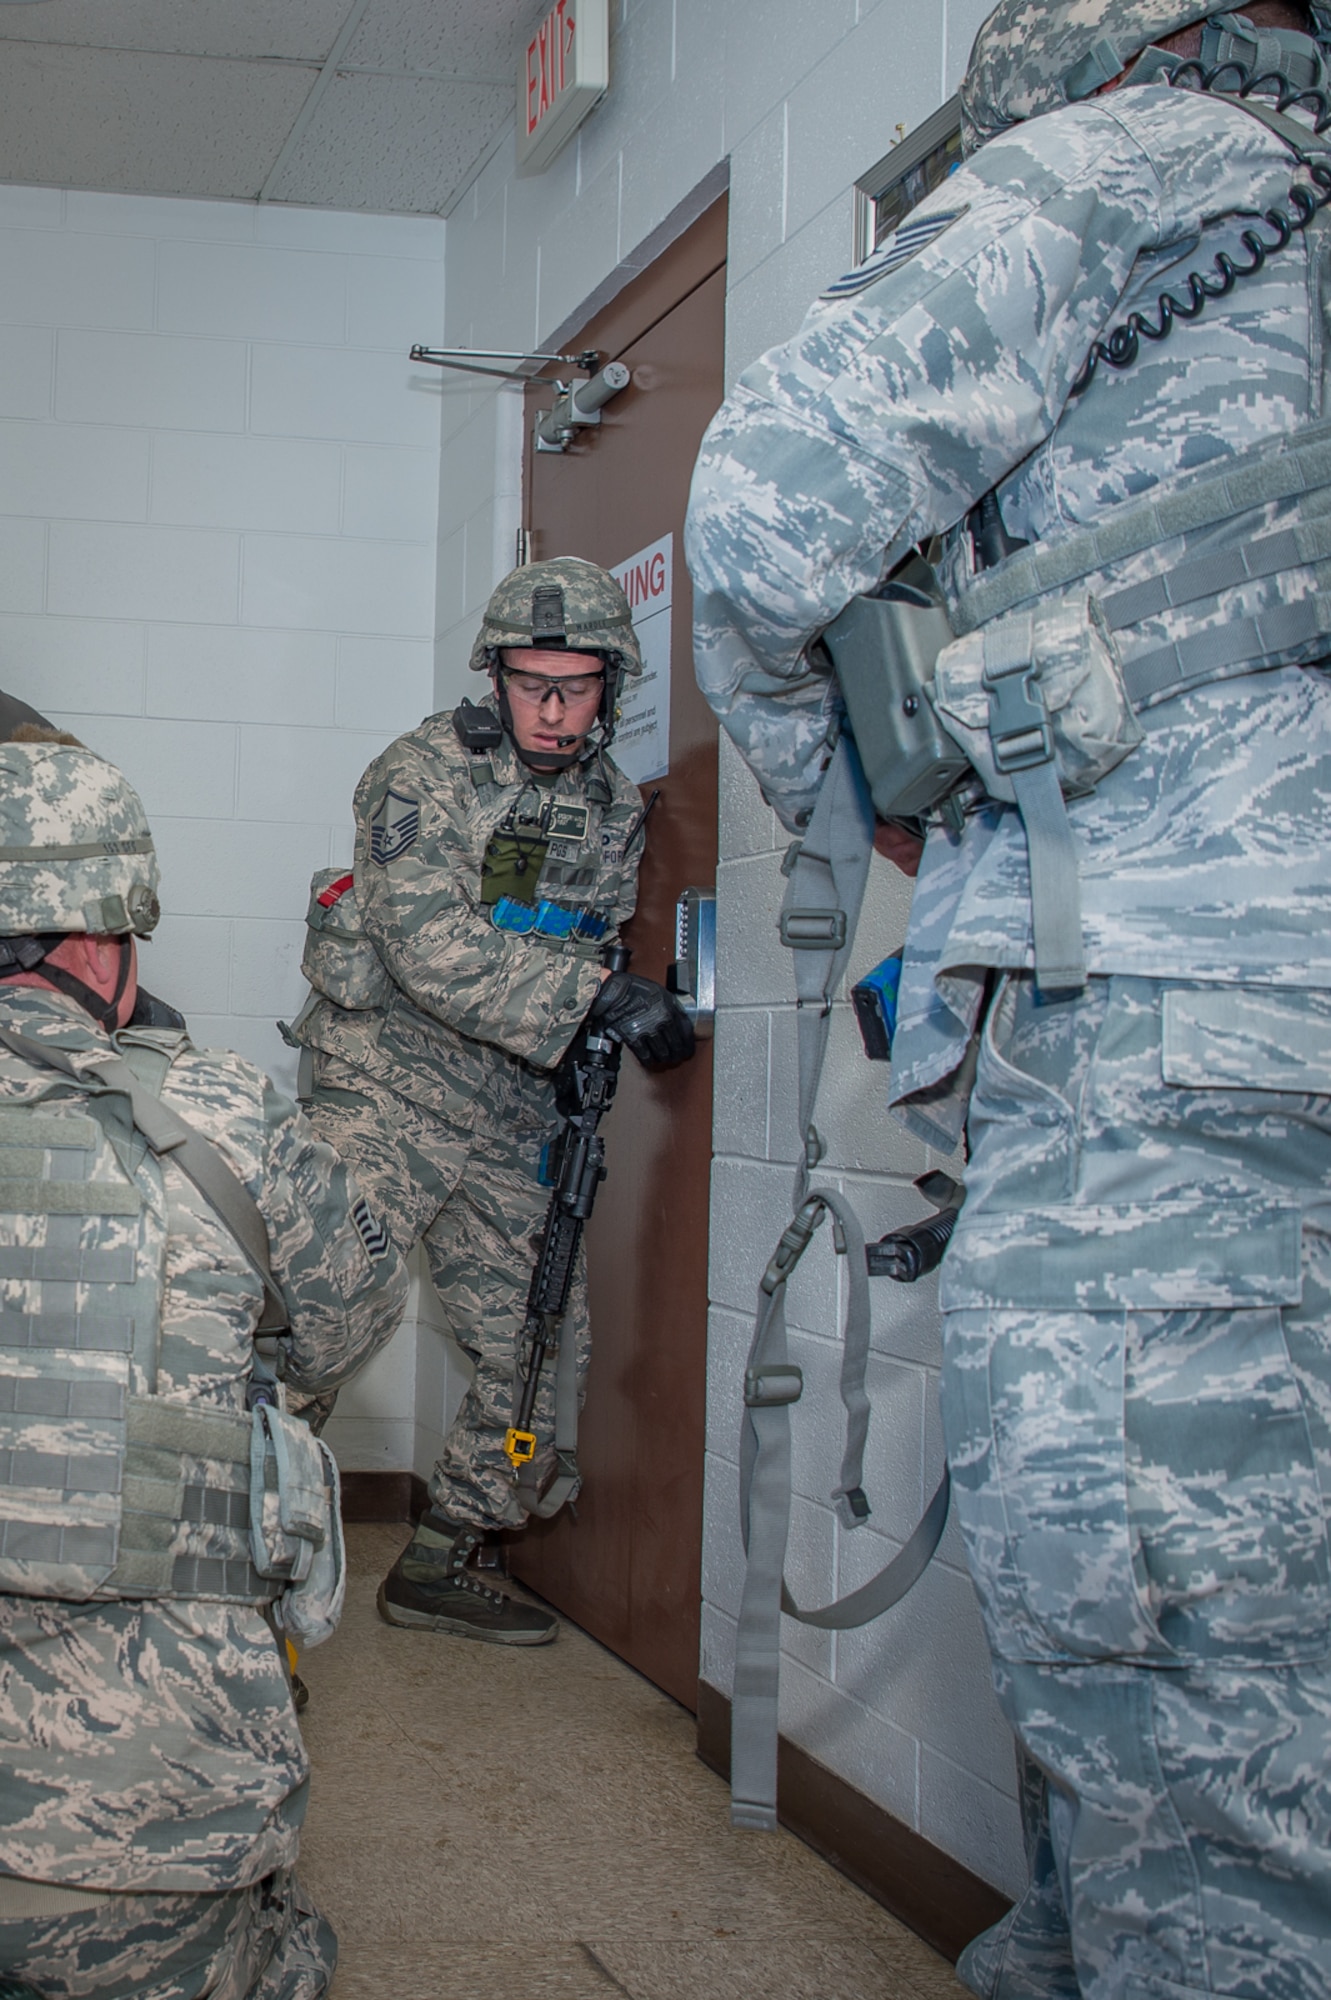 U.S. Air Force Master Sgt. Gregory Wardle, 153rd Security Forces Squadron, communicates with Airmen on the other side of a locked door, Dec. 18, 2015 at Cheyenne Air National Guard base in Cheyenne, Wyoming. Wardle and several security forces Airmen clear buildings and check for wounded after eliminating a gunman during an active shooter exercise. The scenario was in support of memorandum sent by Secretary of the Air Force Deborah James to test lockdown and active shooter procedures in response to shootings in Chattanooga, Tenn. (U.S. Air National Guard photo by Master Sgt. Charles Delano)